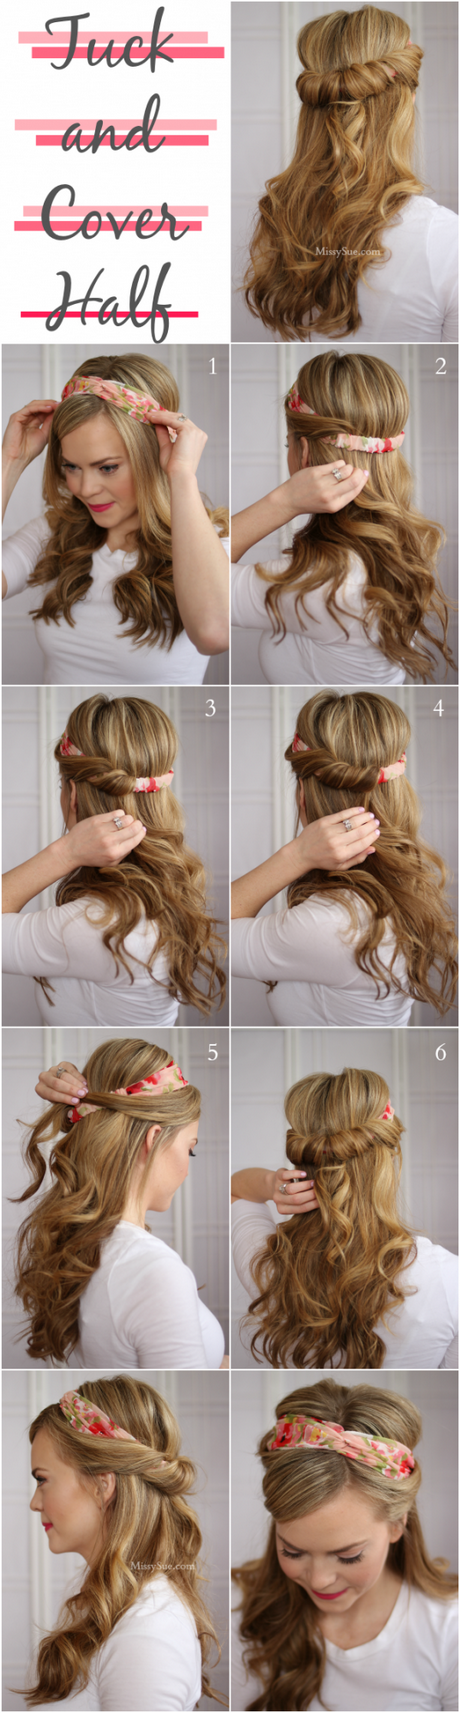 Hairstyles 10 minutes hairstyles-10-minutes-72